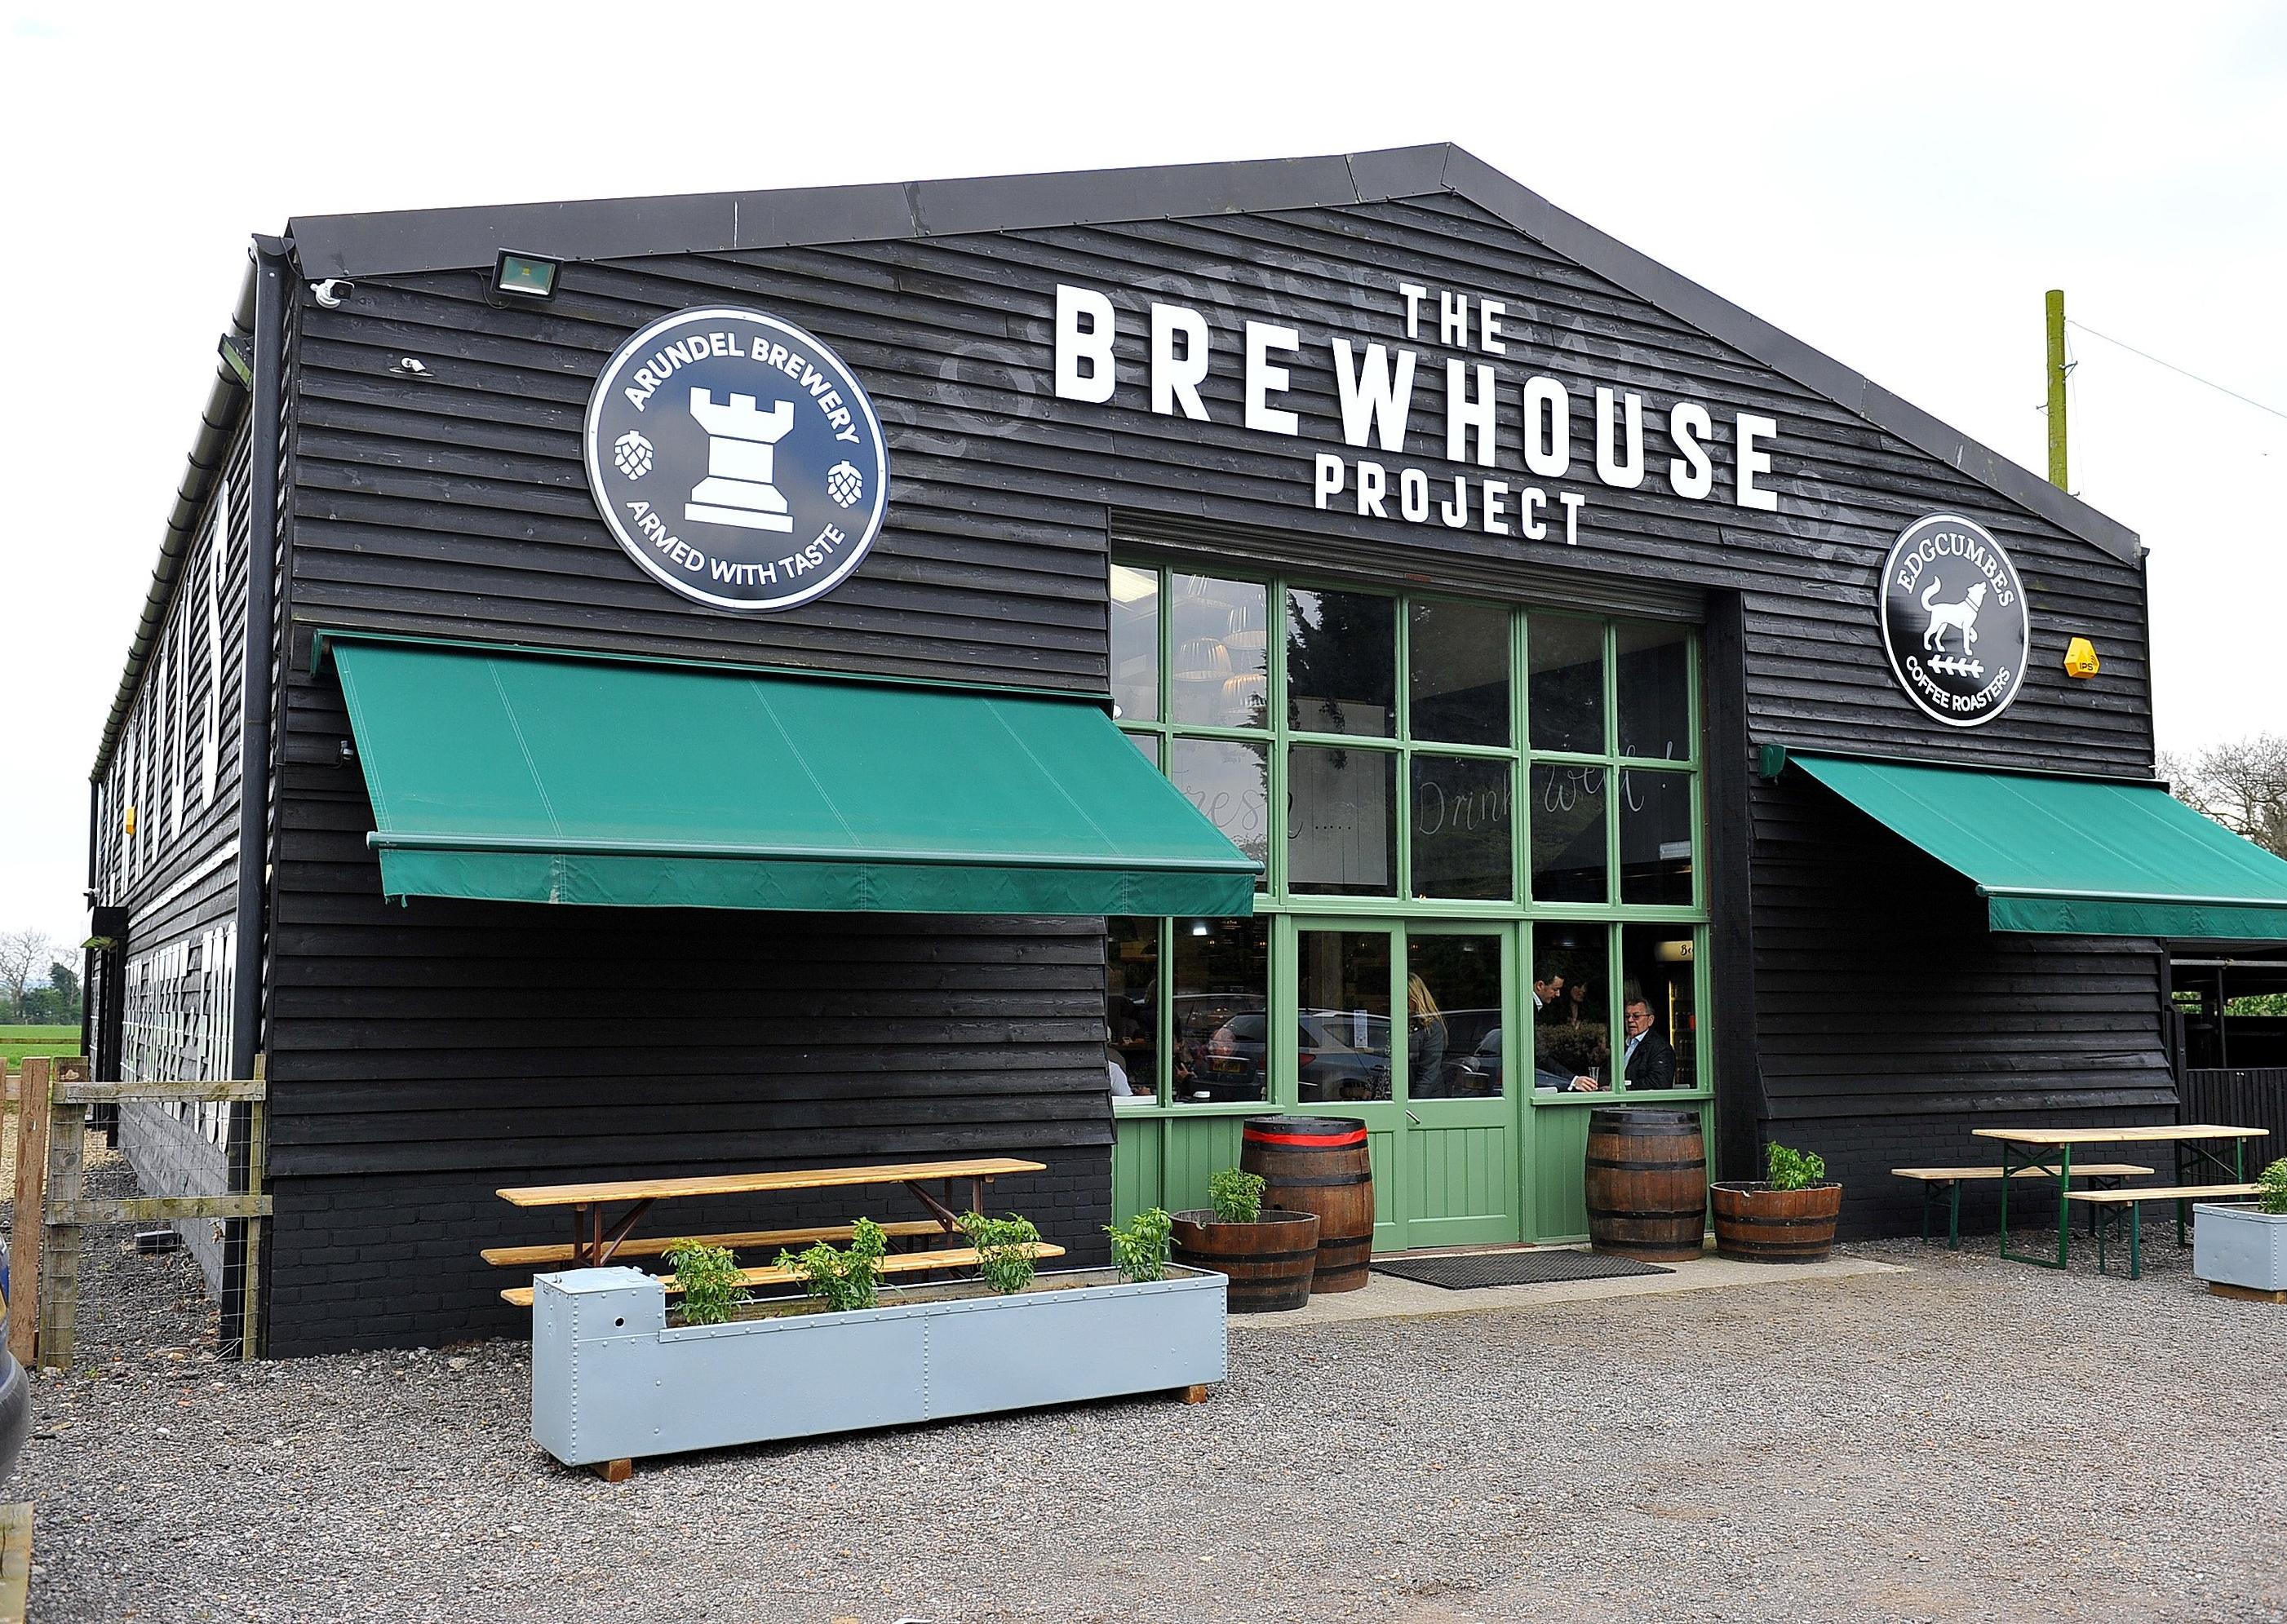 Arundel Brewfest 2020 is at The Brewhouse Project from January 24-26